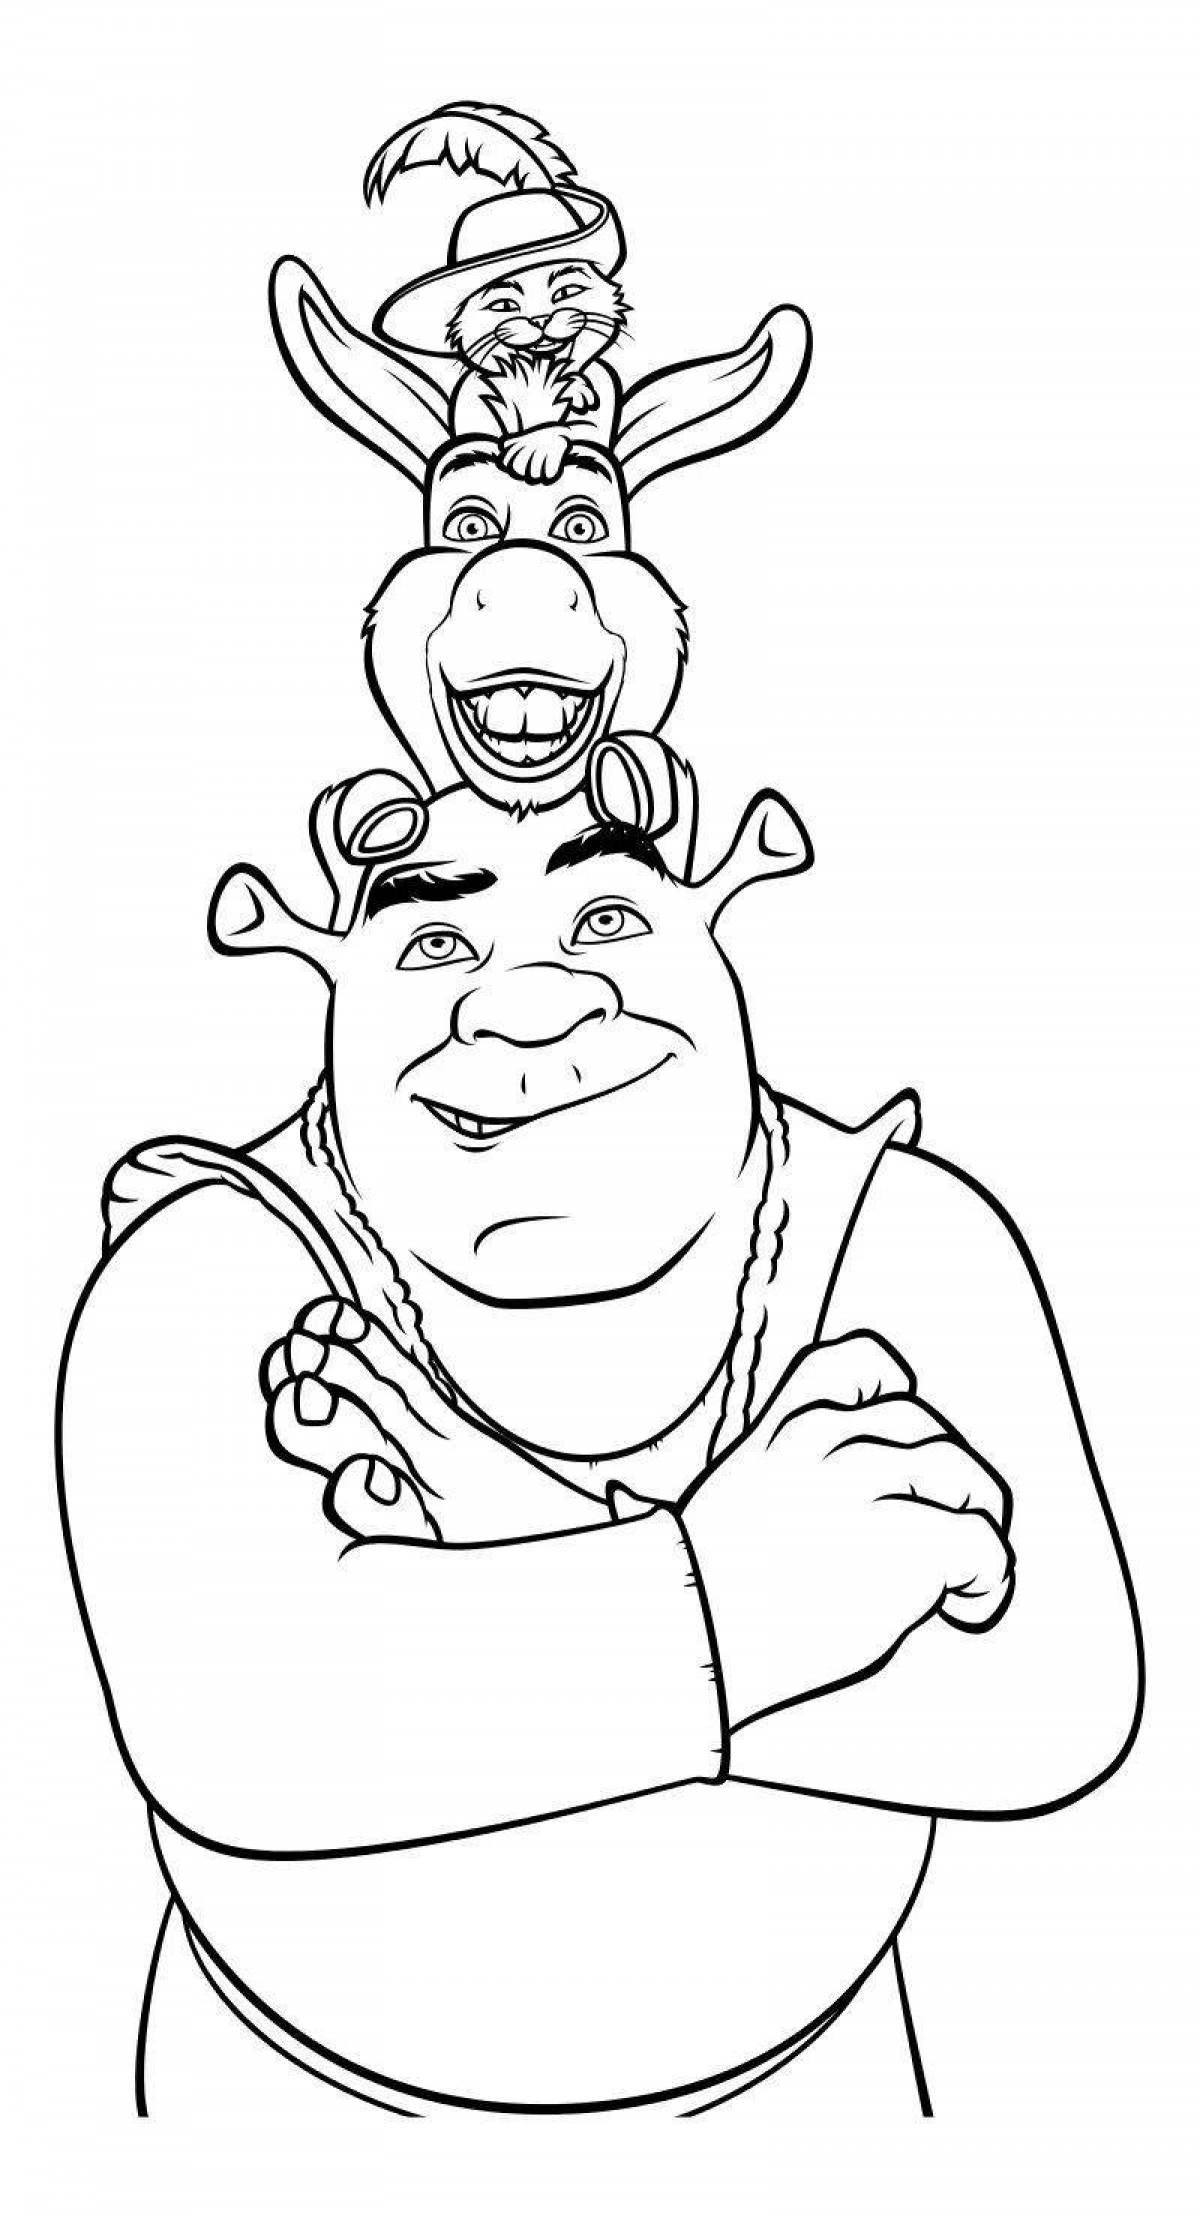 Animated shrek coloring page